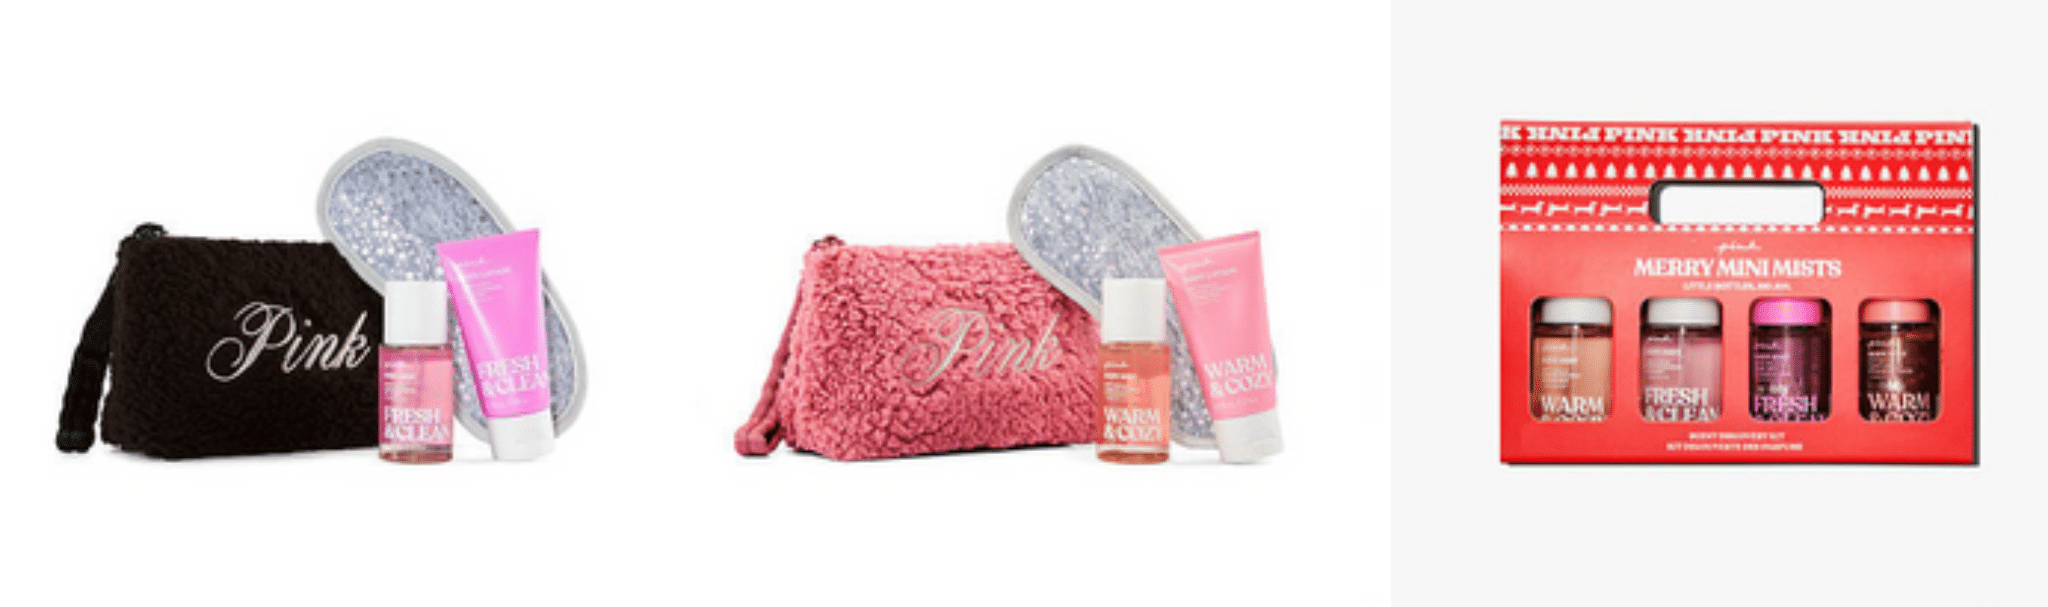 Victoria Secret Beauty Gift Sets ON CLEARANCE!